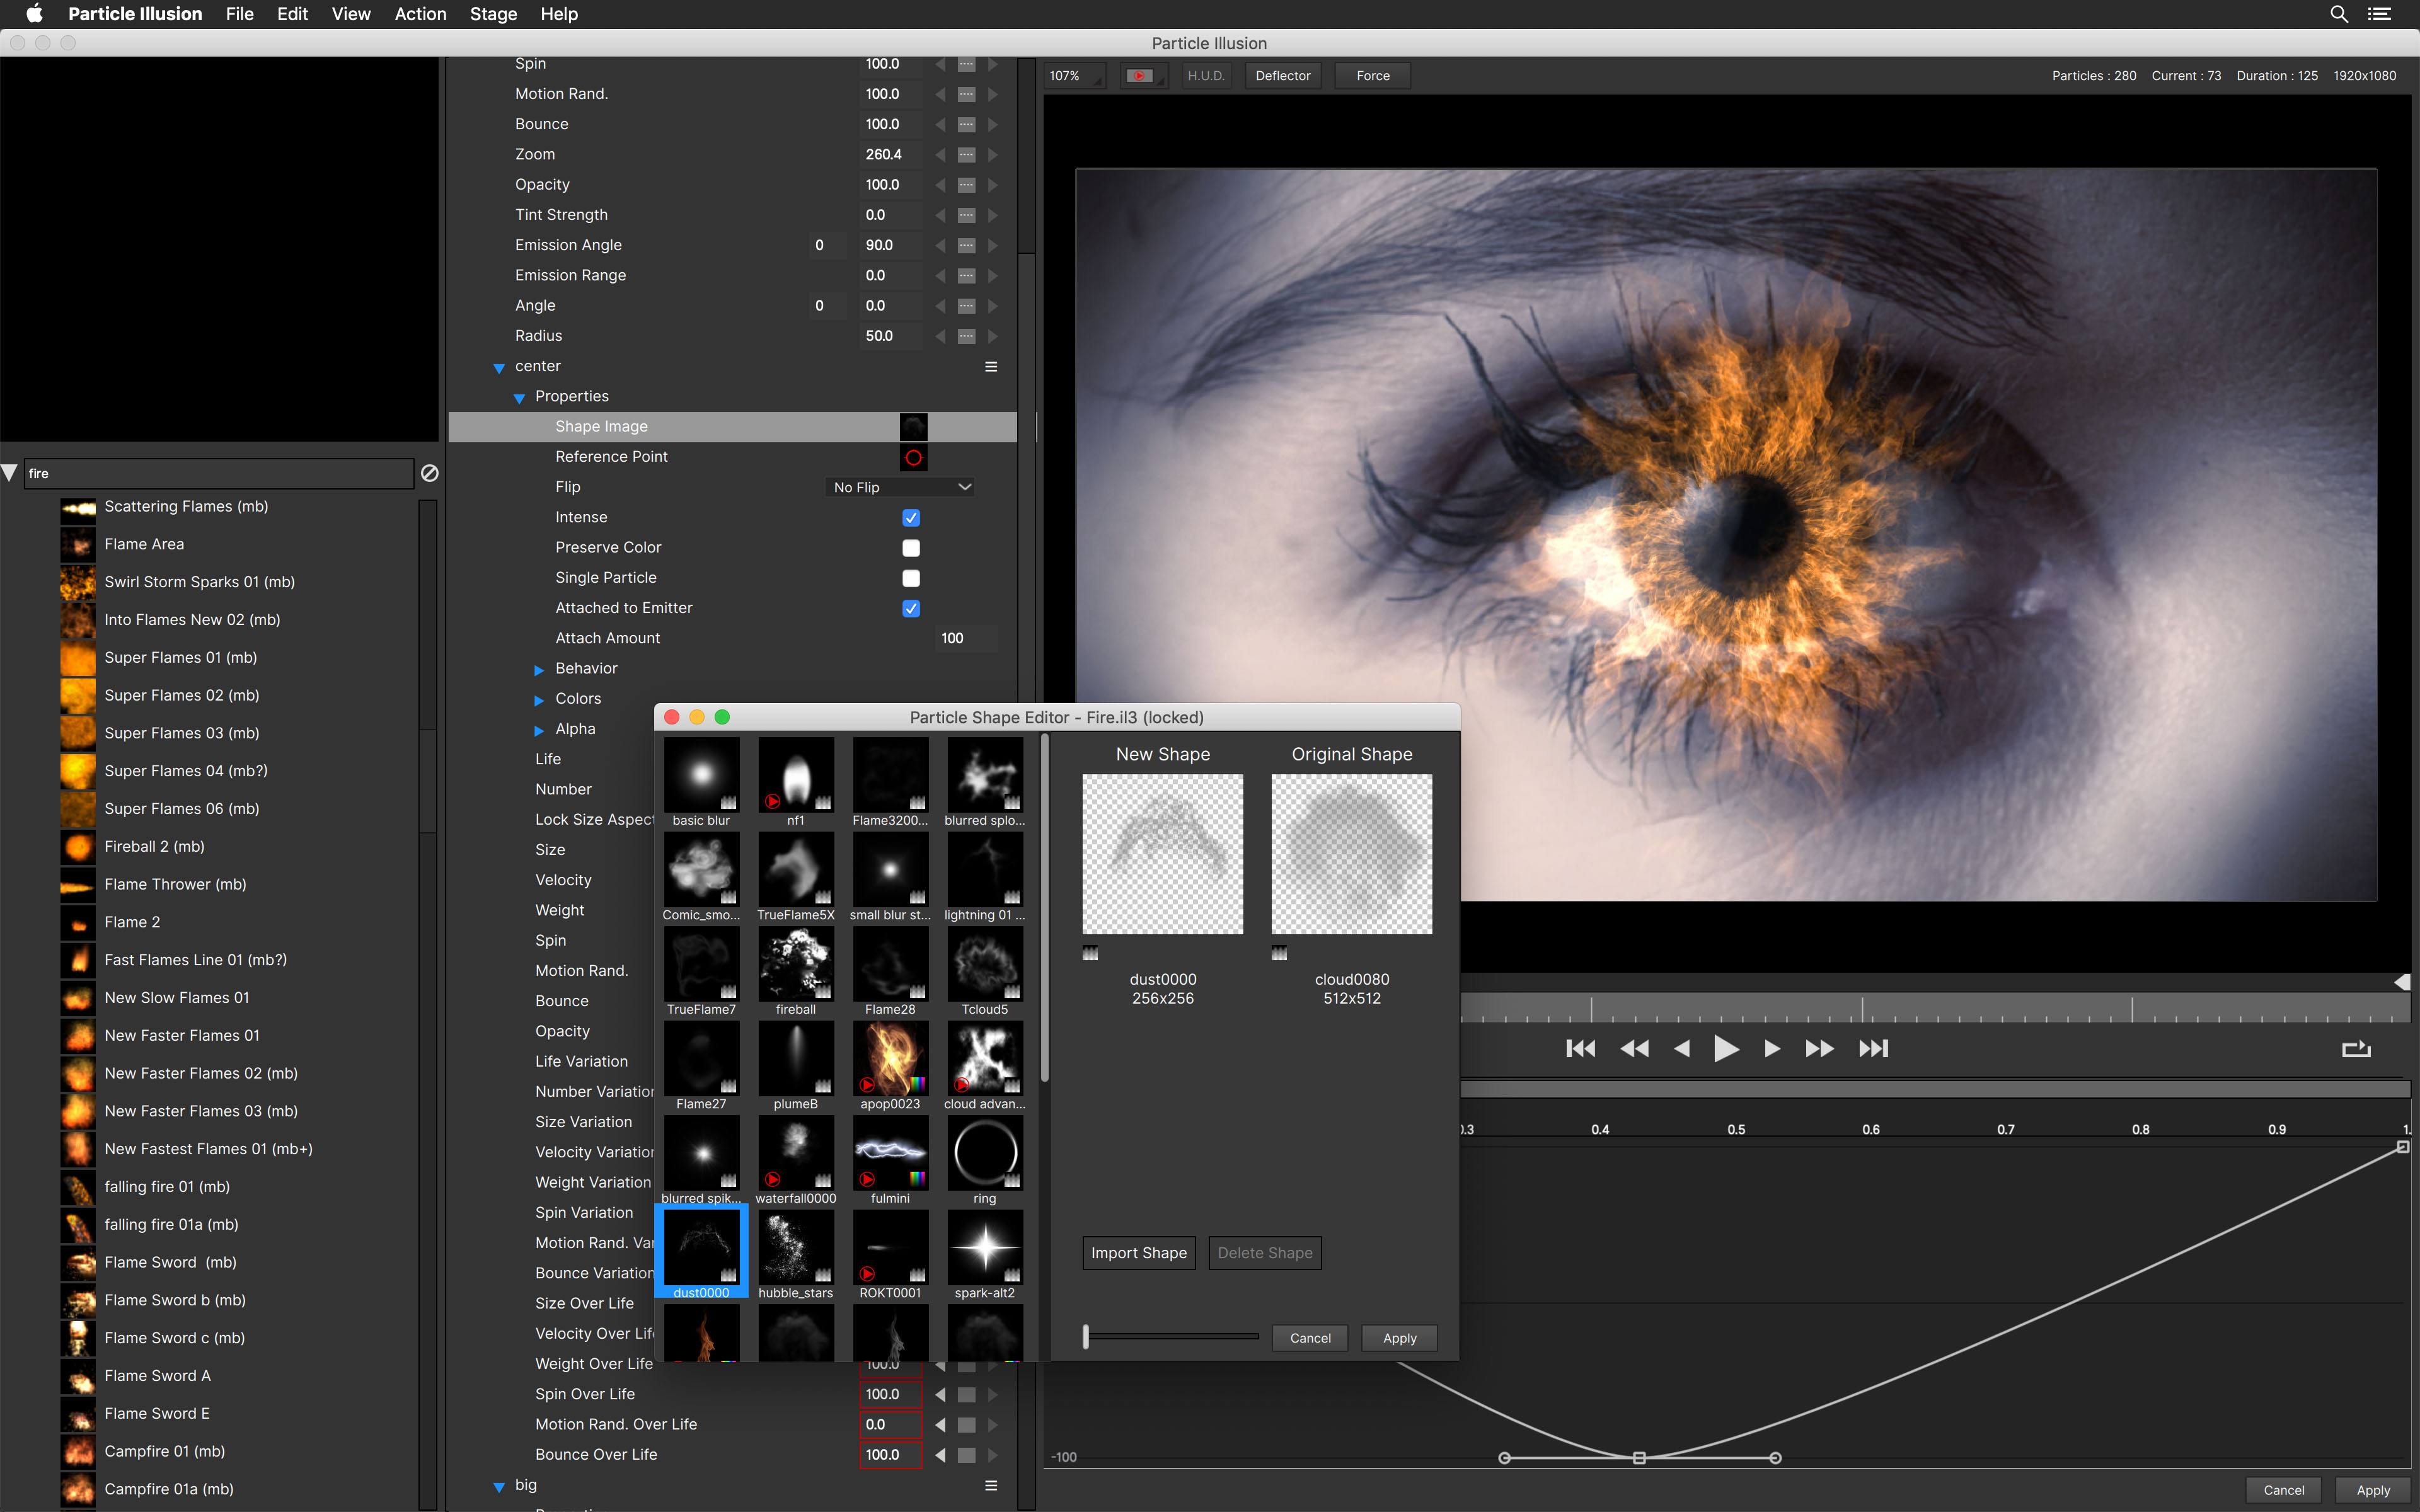 New Particle Illusion editing features in Continuum 2019.5